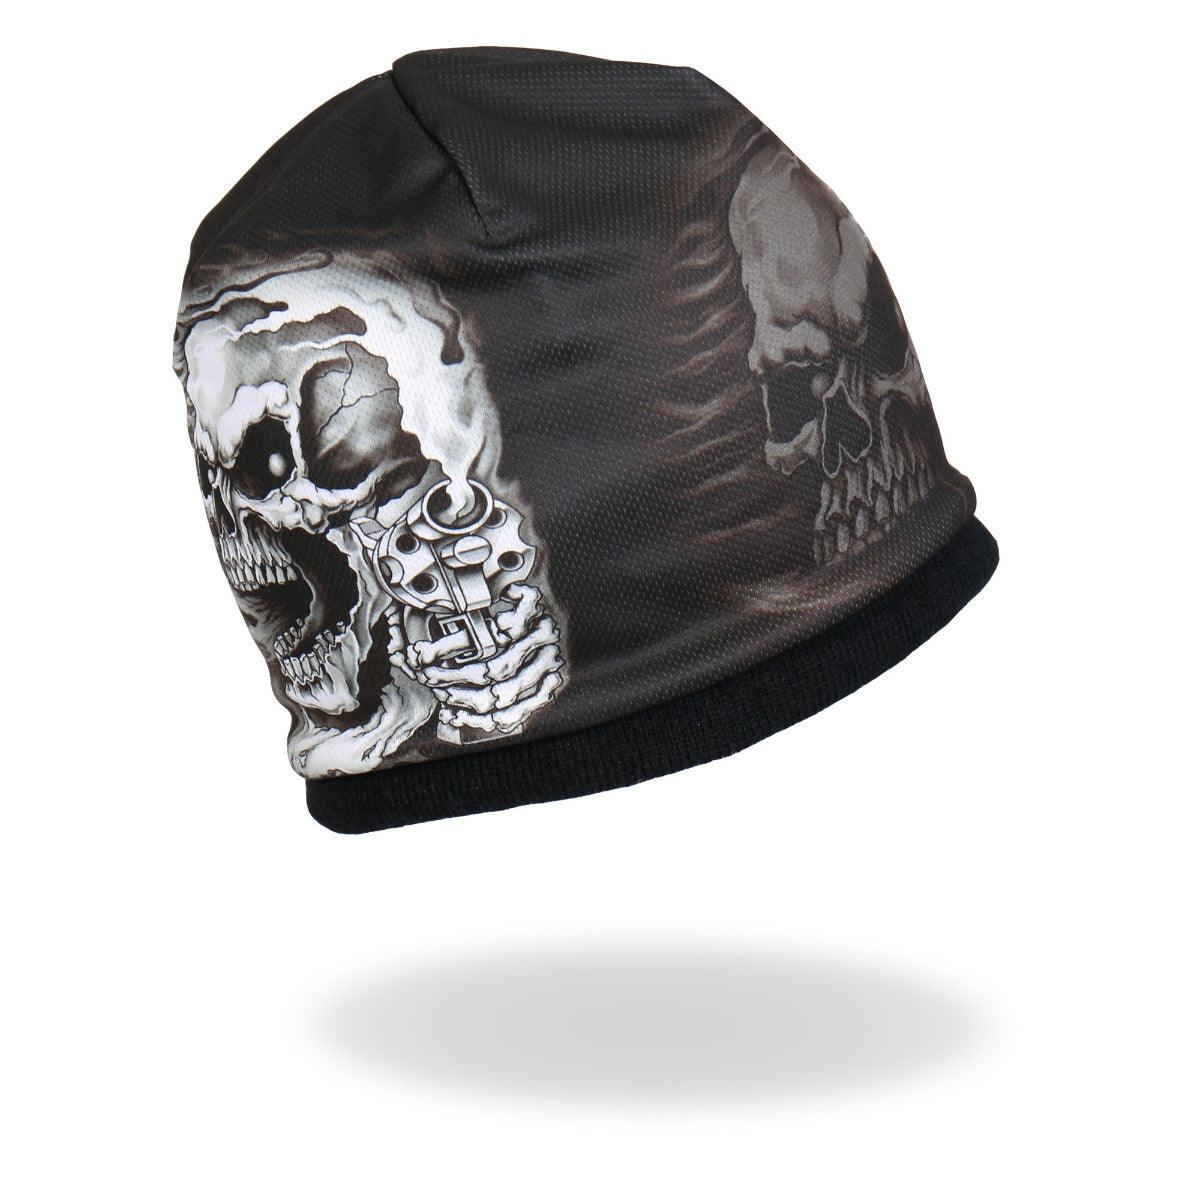 Hot Leathers Sublimated Assassin Skull Beanie - American Legend Rider